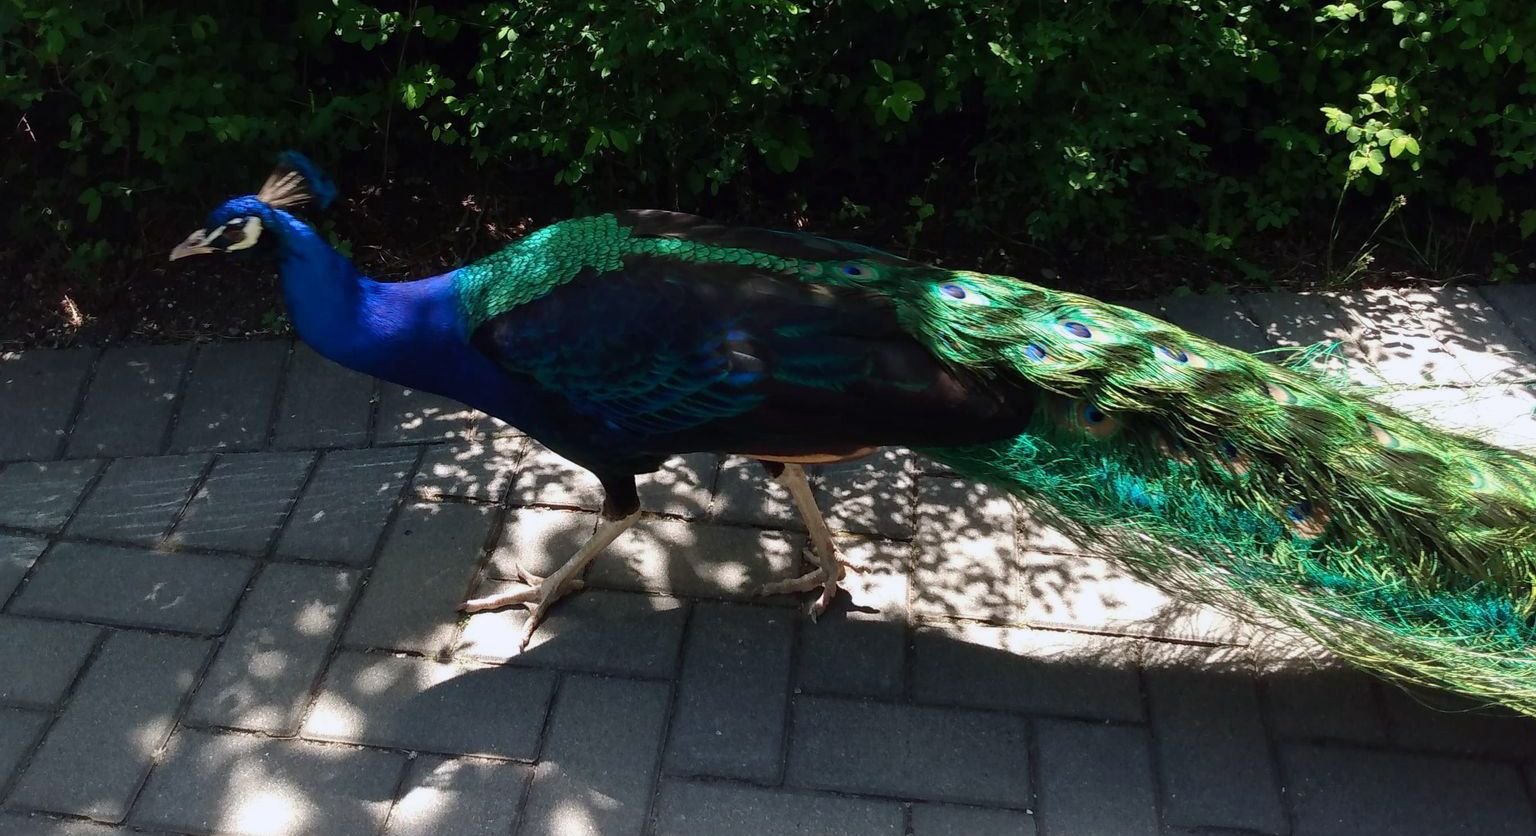  If you want you can pass by Beacon Hill park which has peacocks, for some reason. They are hilariously loud. 